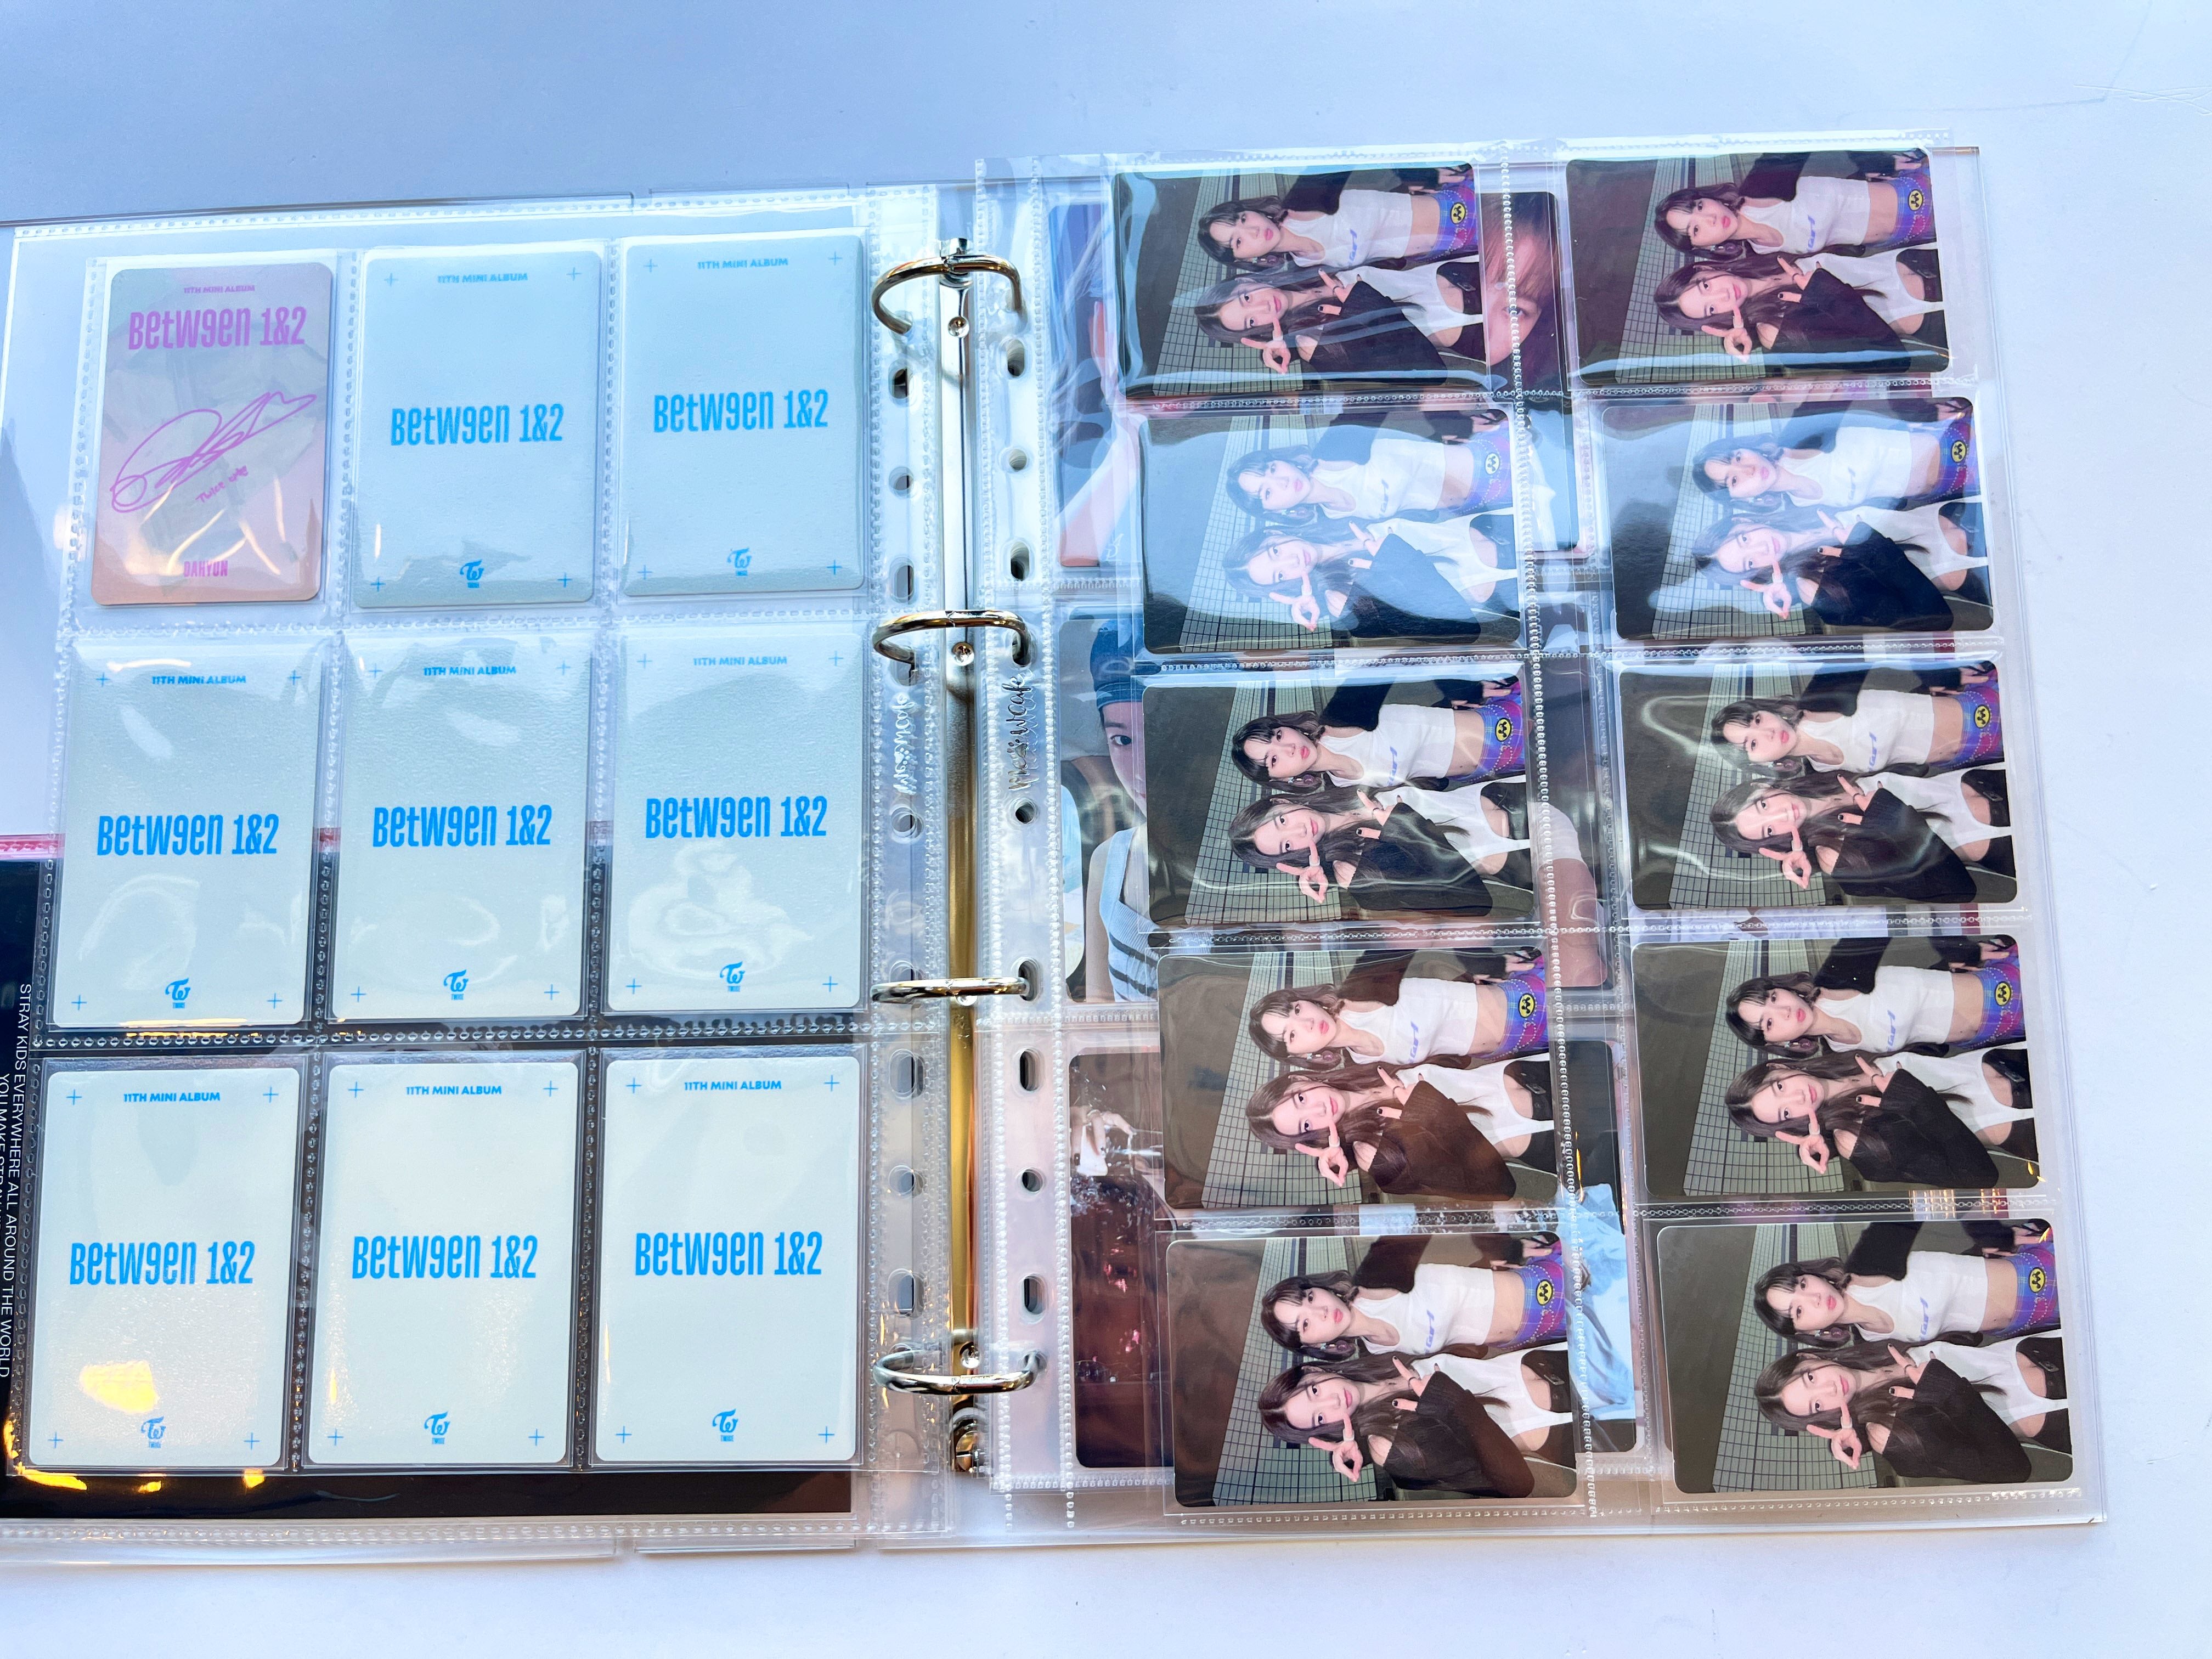 K-KEEP [A4 Standard] - Acrylic Series -  Aesthetic Hardcover Binder 4 x 1.25 inch D-Ring | Large Capacity Kpop Photocard Binder (Self-Assembly Required)